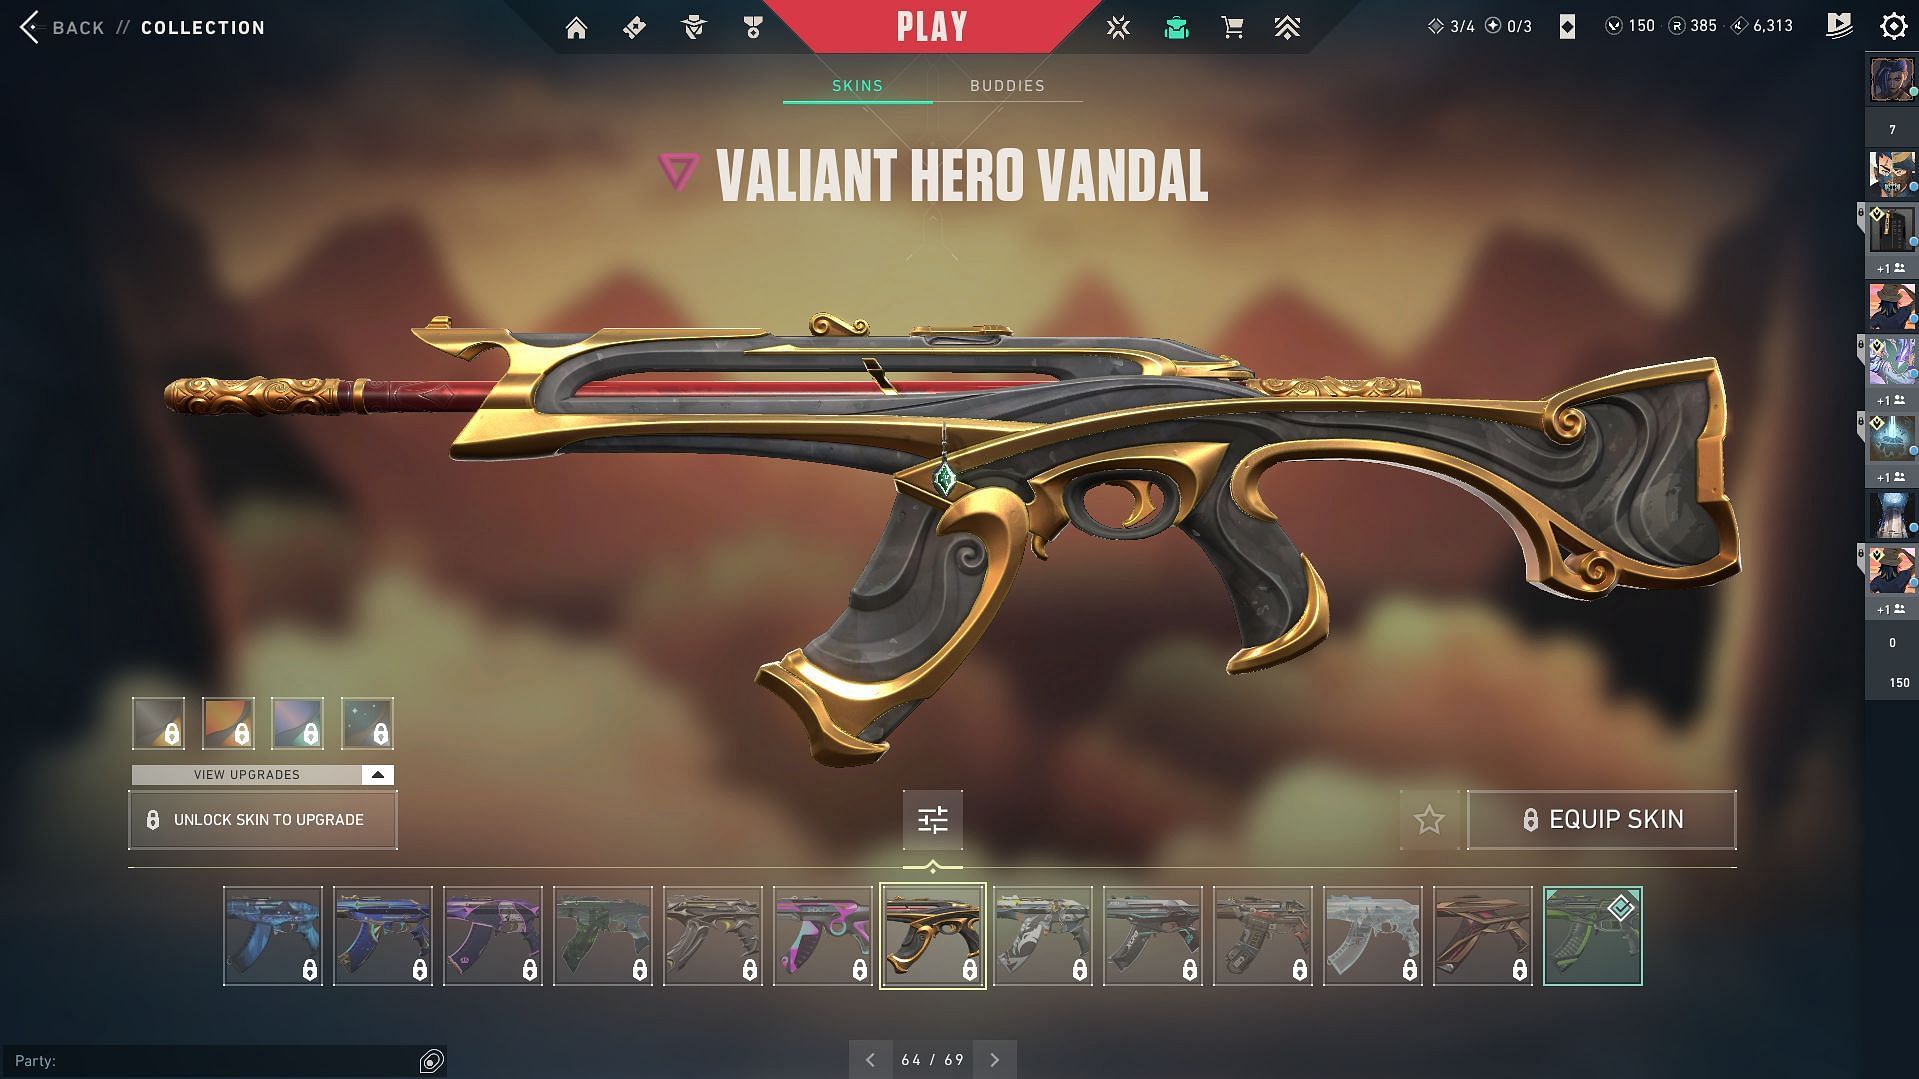 Valiant Hero Vandal, one of the premium Vandal skins available in-game (Image via Riot Games)